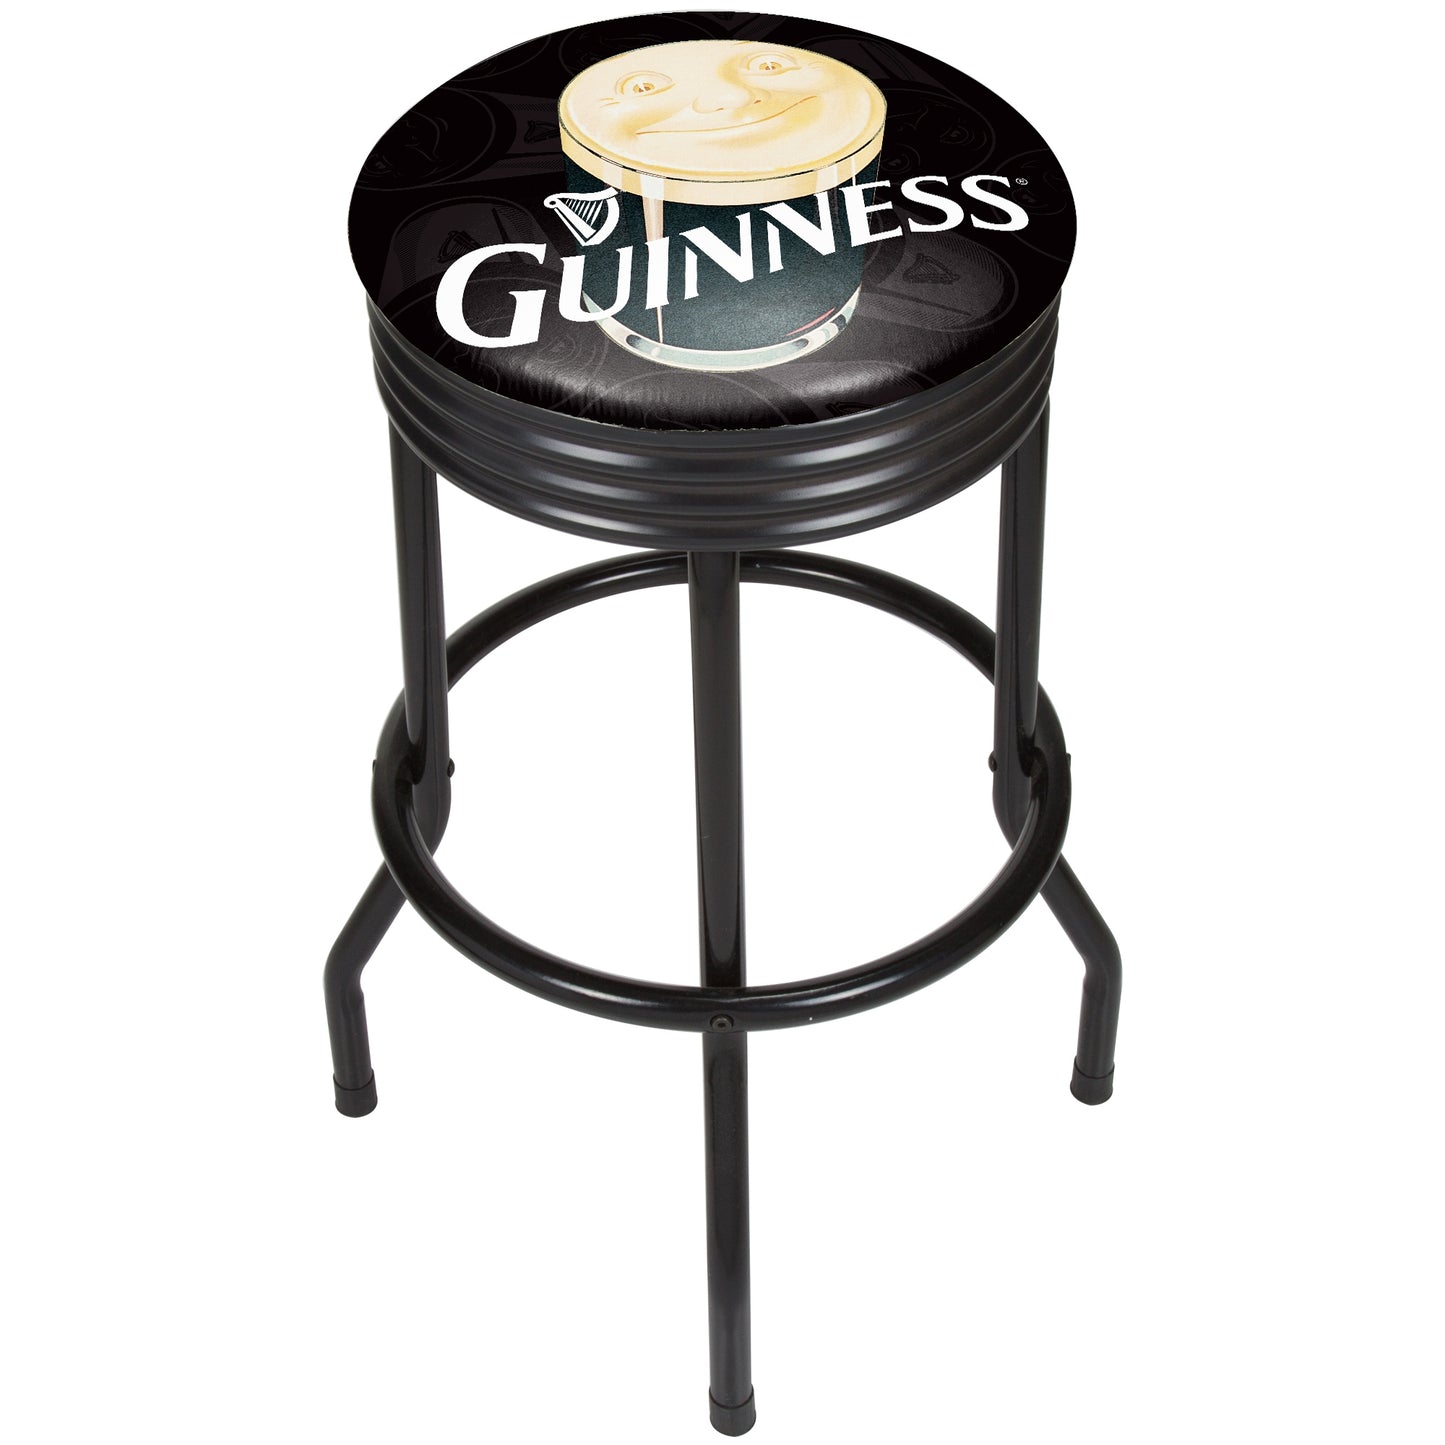 A comfortable Guinness® brand bar stool with a black ribbed swivel seat, featuring a Smiling Pint on it.